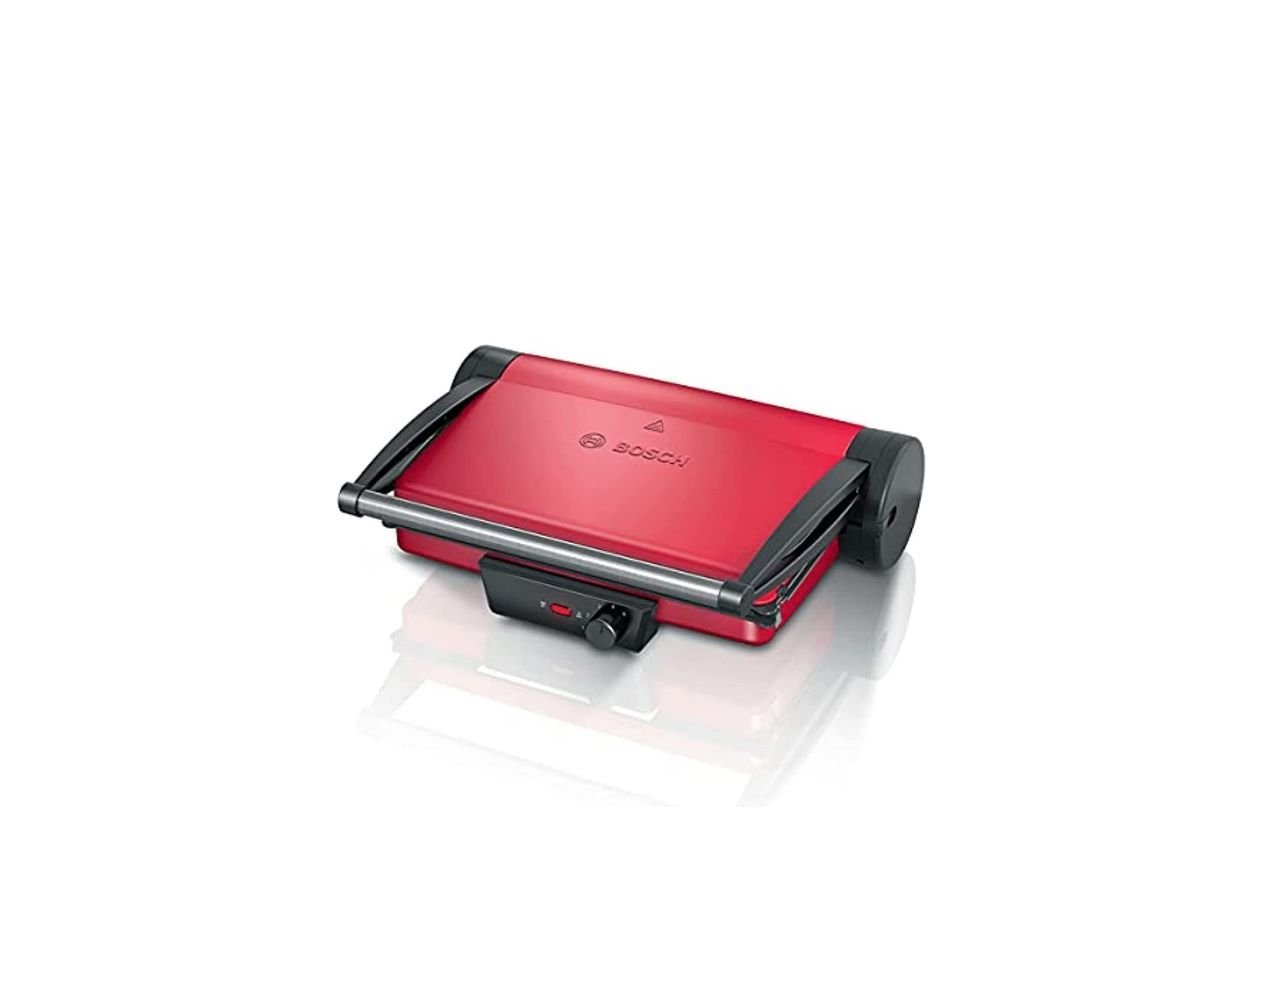 Bosch Contact Grill 1800W Color Red Model-TCG4104GB | 1 Year Brand Warranty.